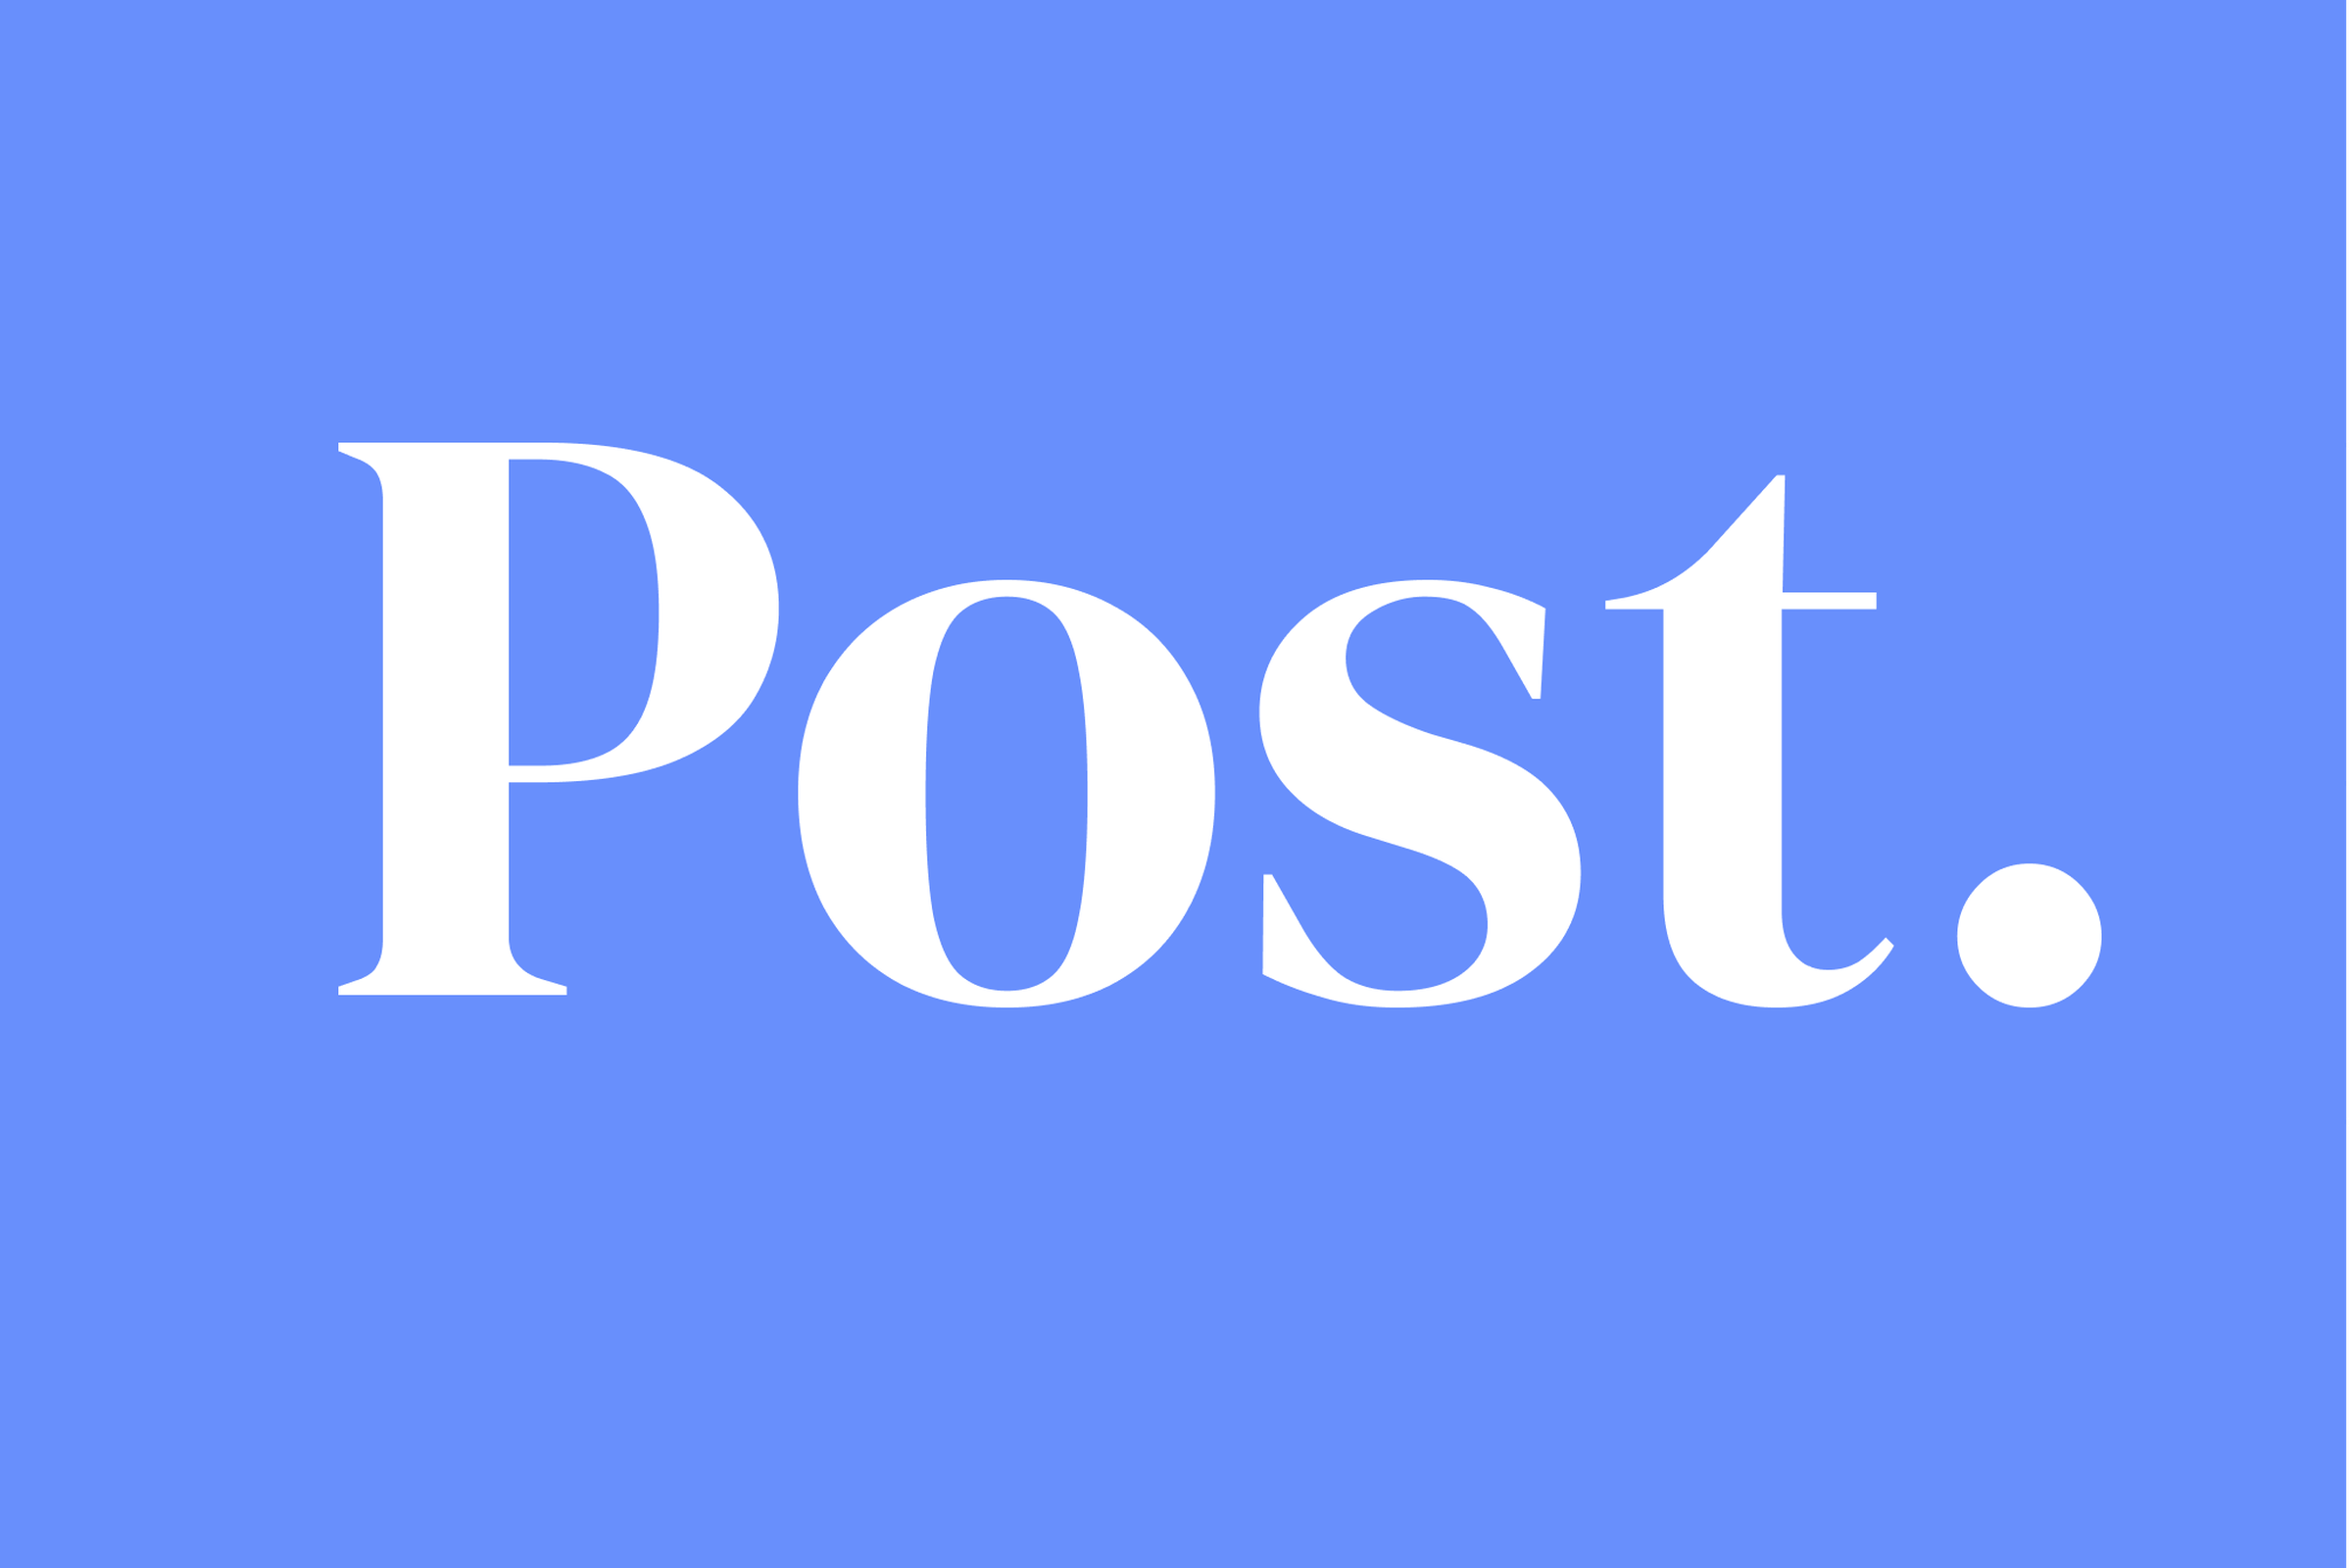 An image showing the logo for Post on a purple background